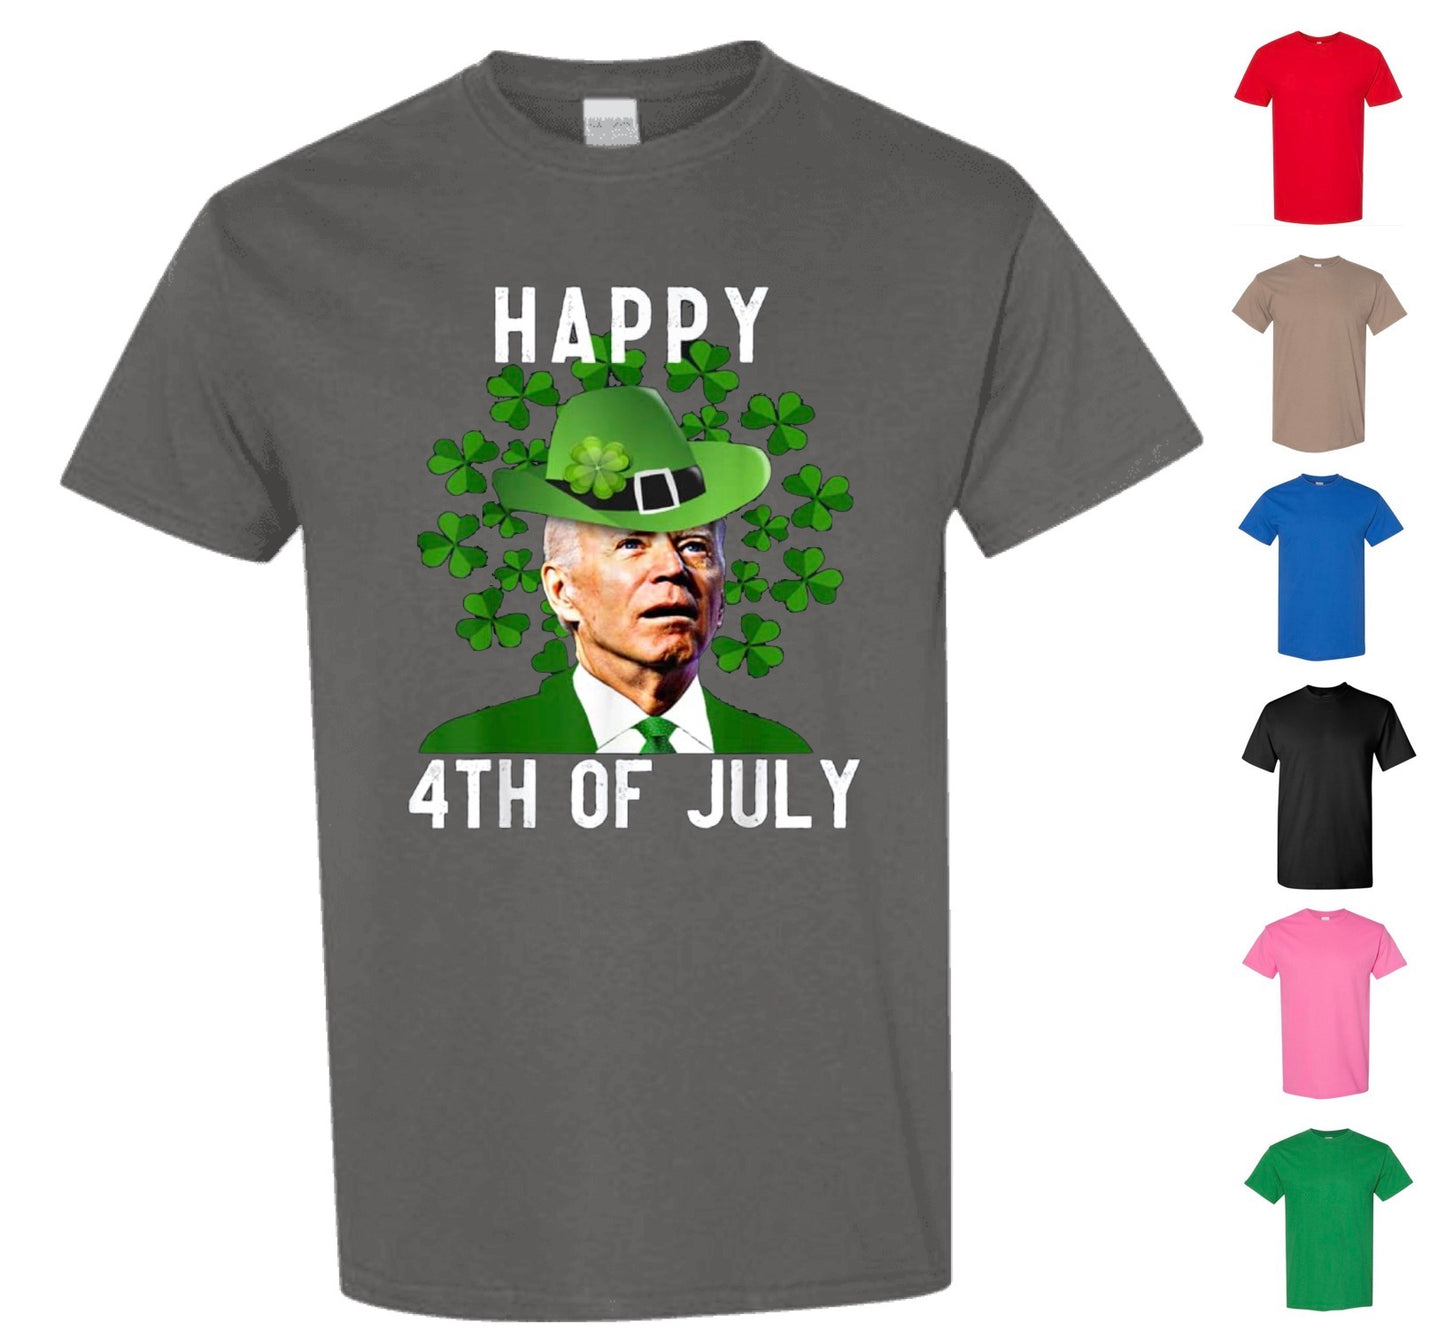 Happy 4th of July T-Shirt (FREE Shipping)